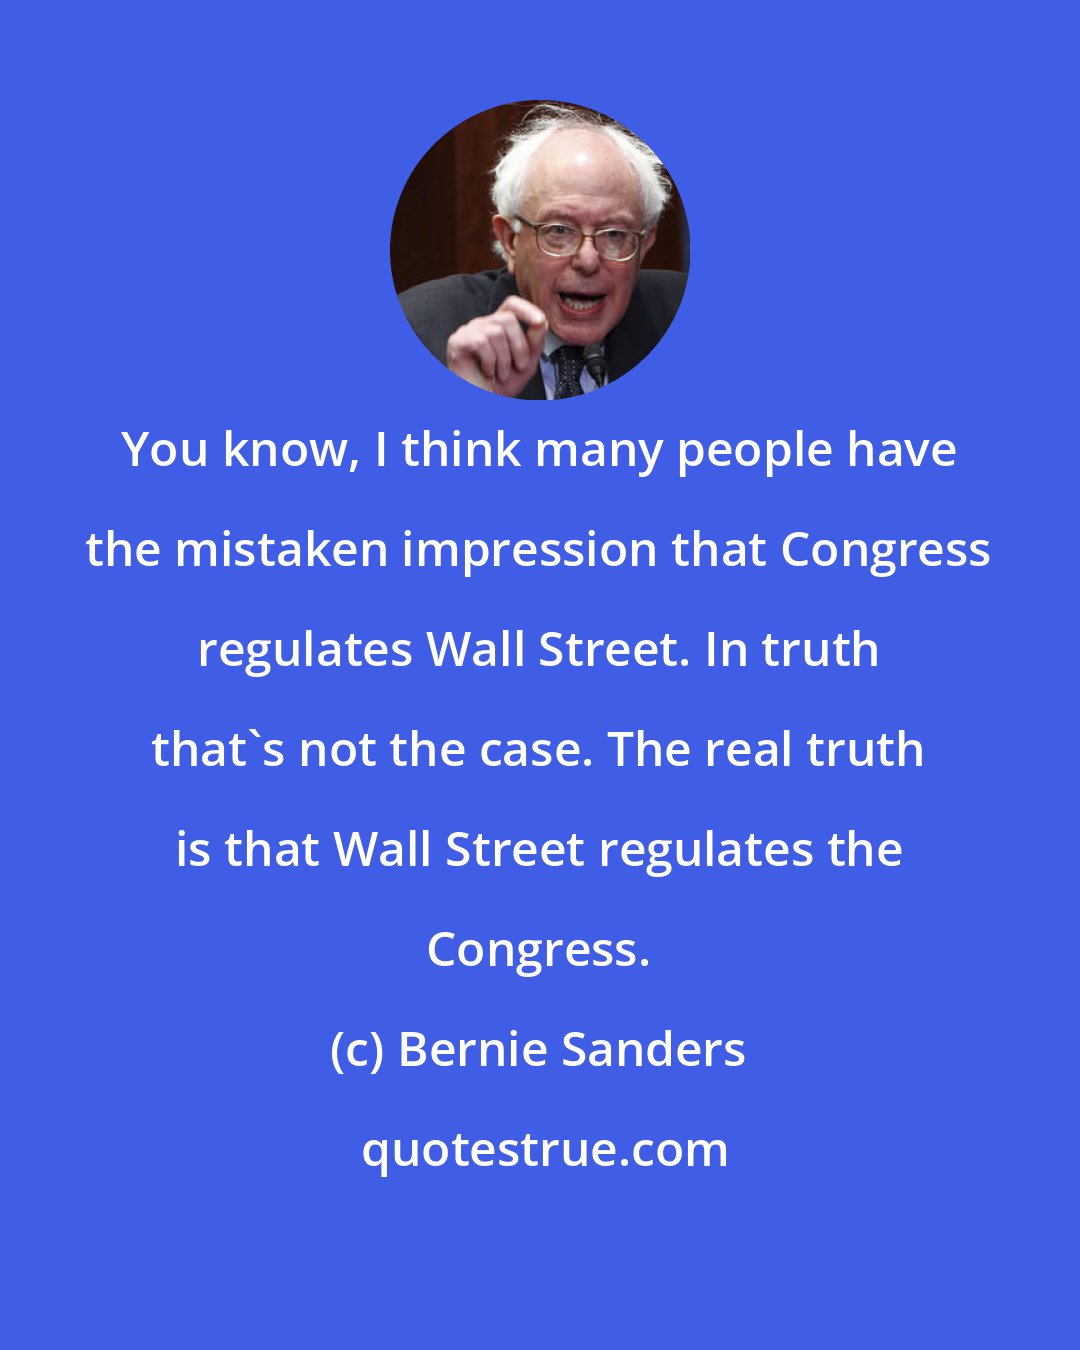 Bernie Sanders: You know, I think many people have the mistaken impression that Congress regulates Wall Street. In truth that's not the case. The real truth is that Wall Street regulates the Congress.